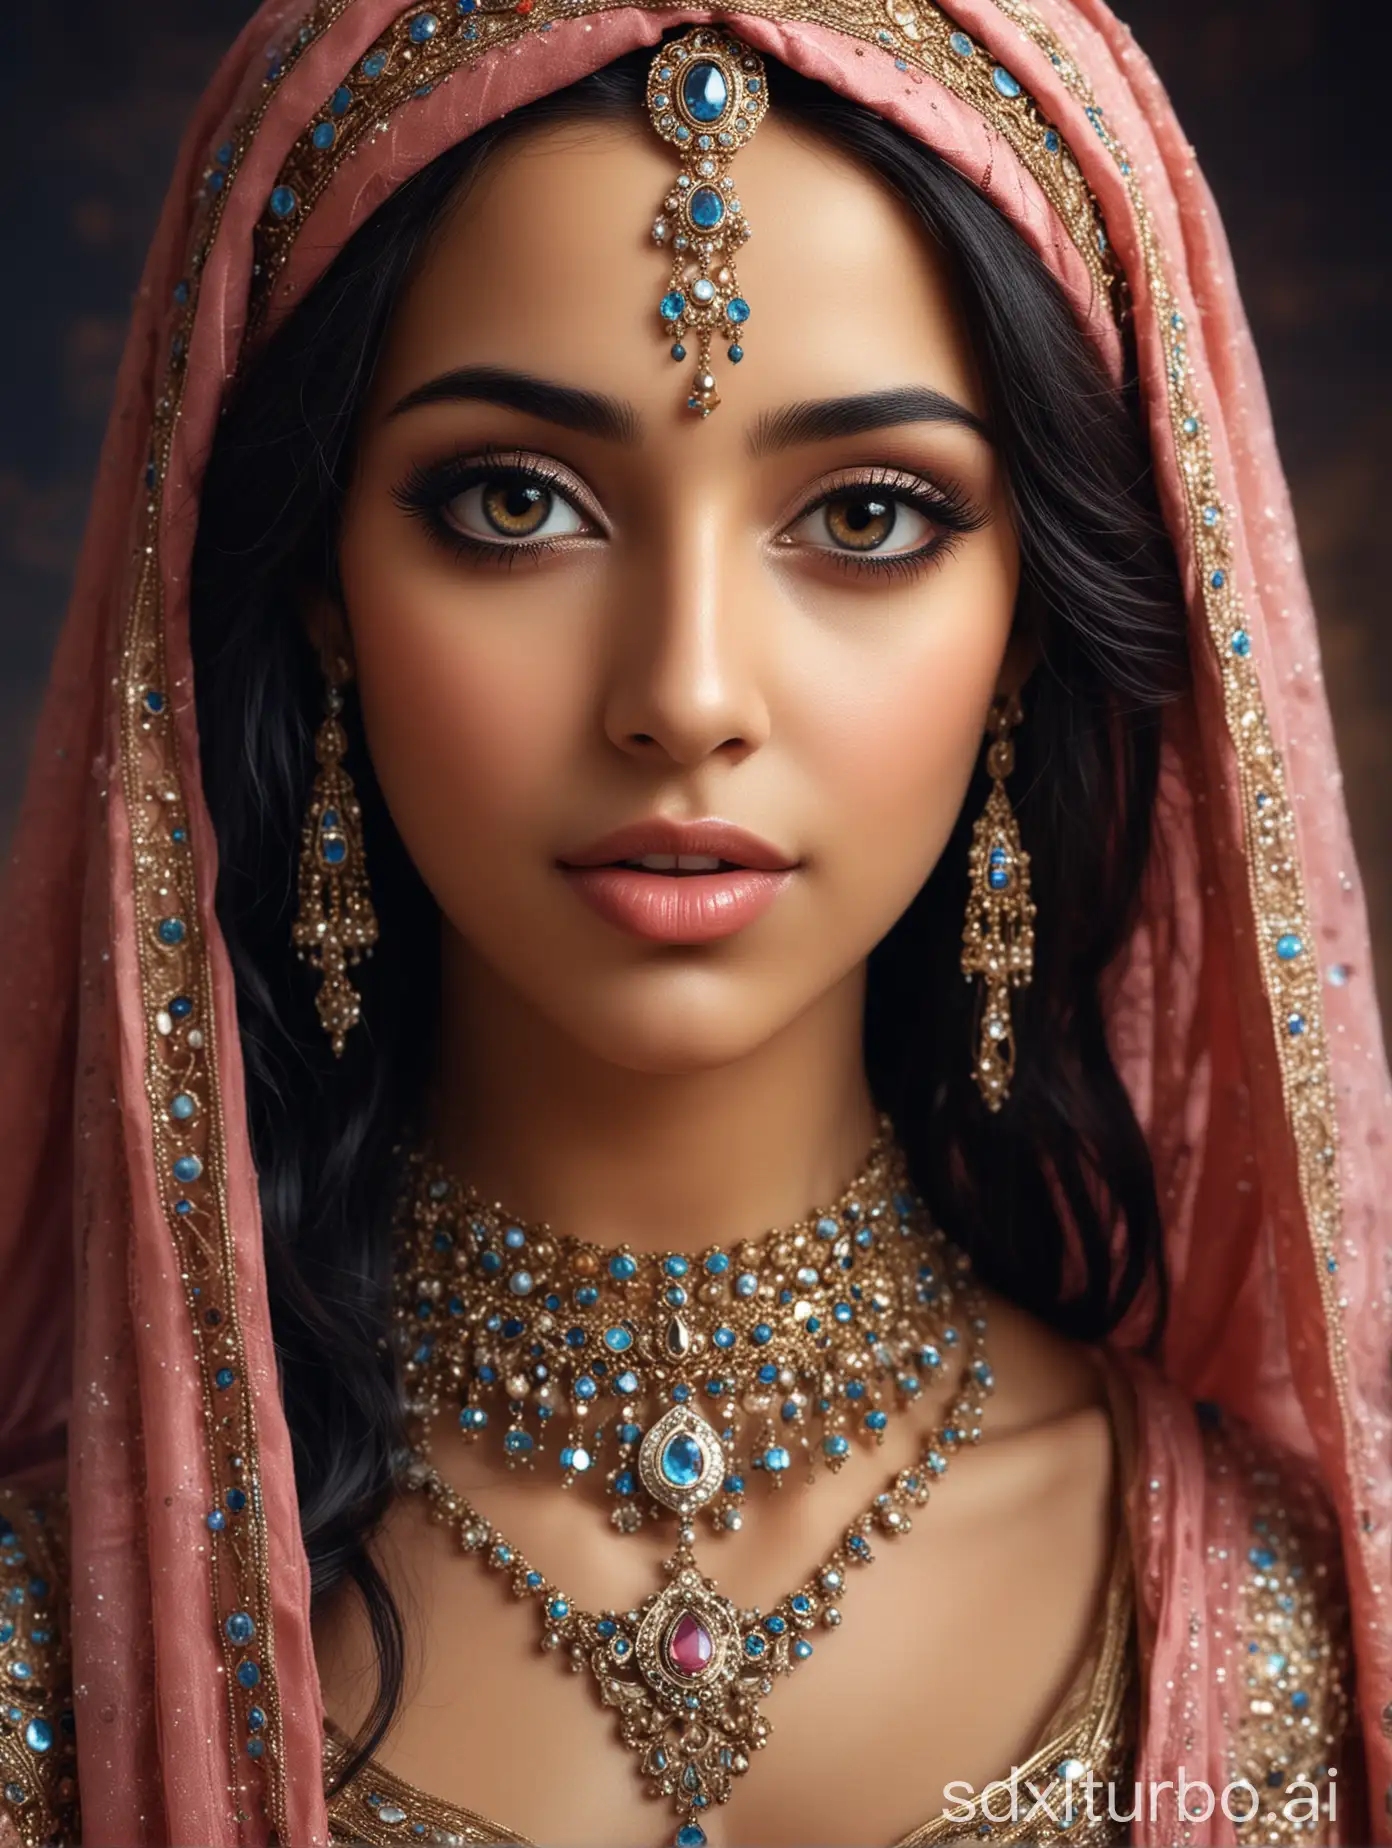 Portrait of an Arabian princess from a thousand and one nights, dreamy, fairy-tale like, beautiful, very detailed